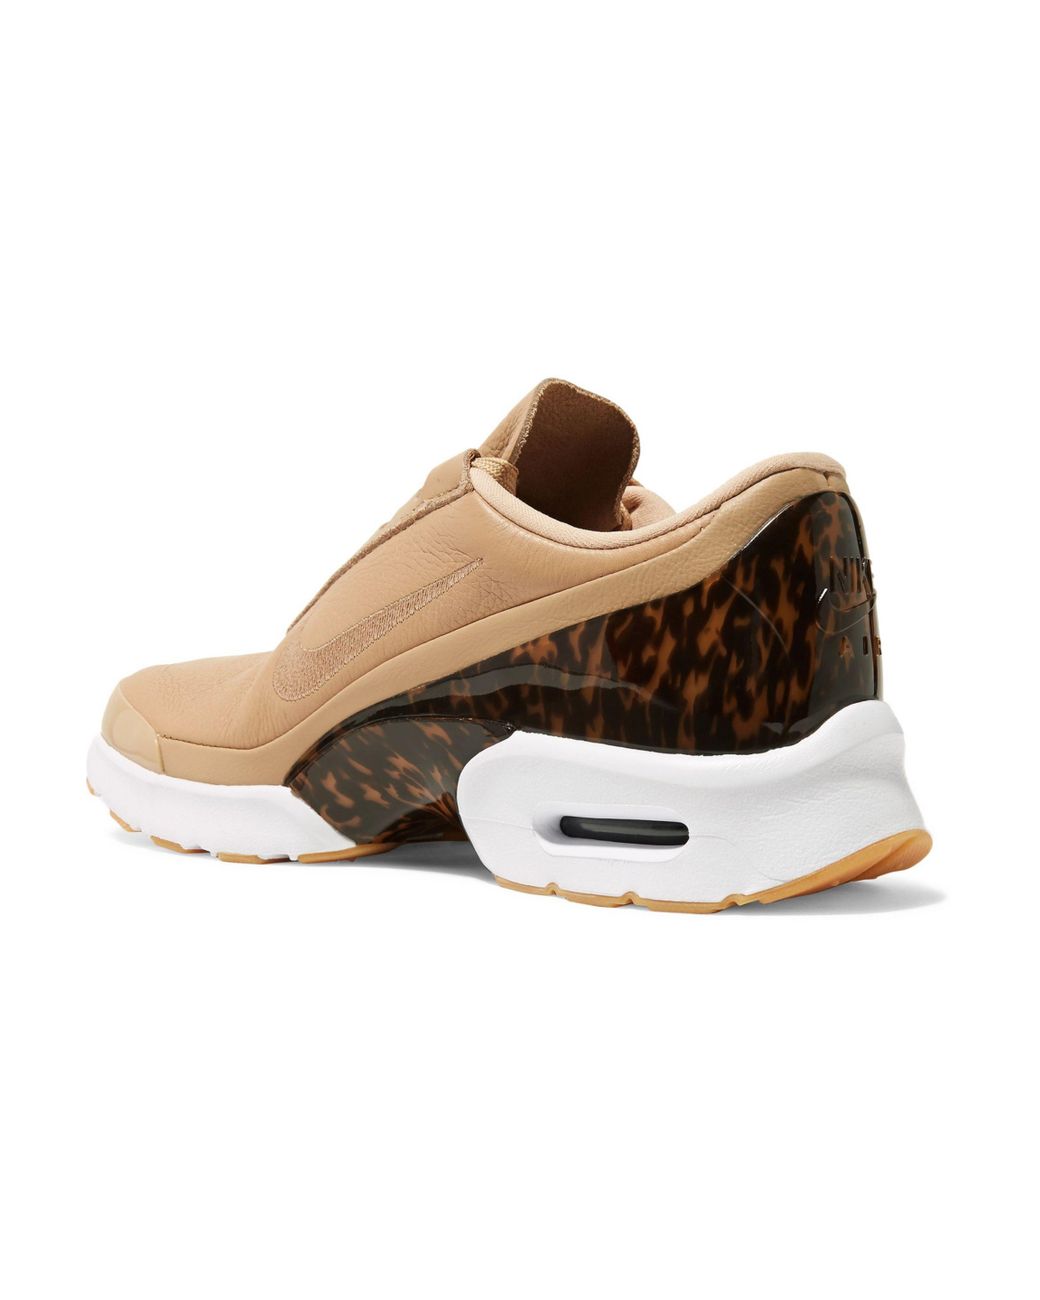 Nike Max Jewell Lx Leather And Tortoiseshell Sneakers in Natural | Lyst